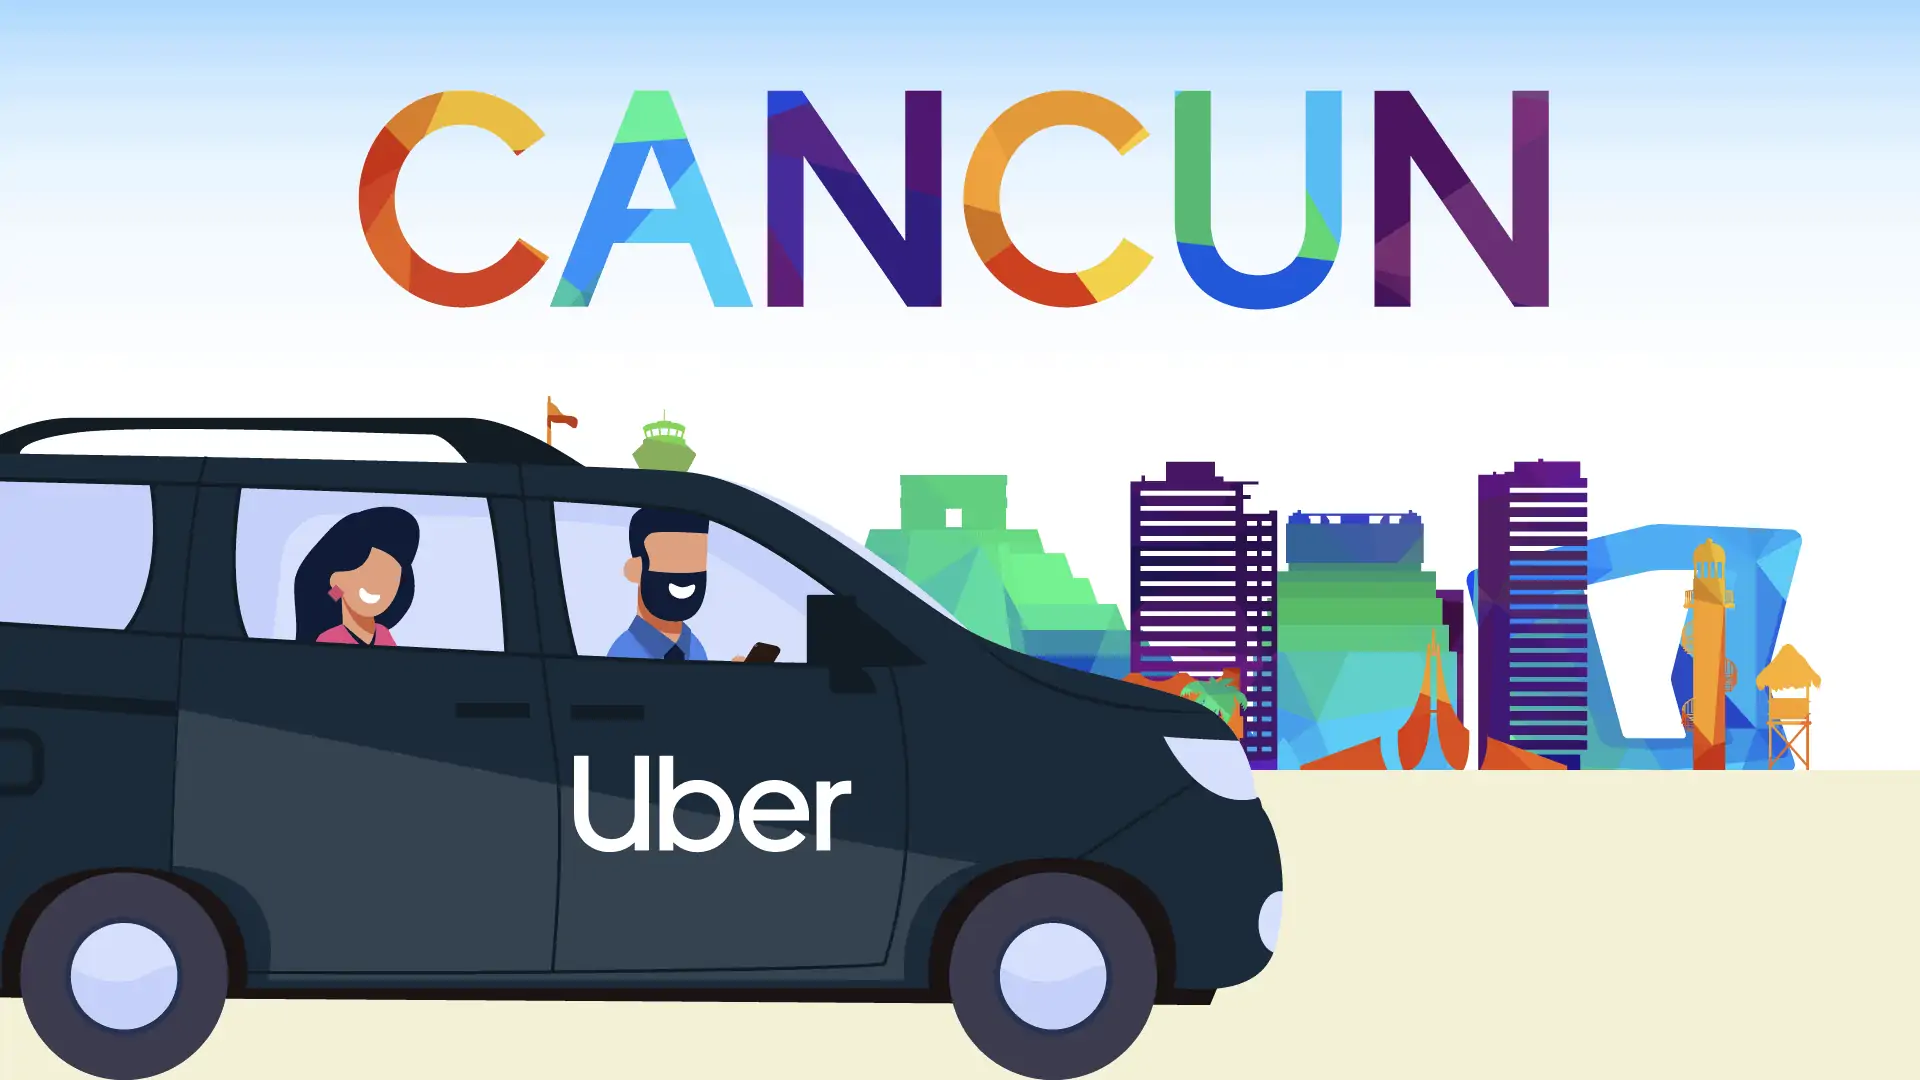 vector graphic showing rider using uber in cancun